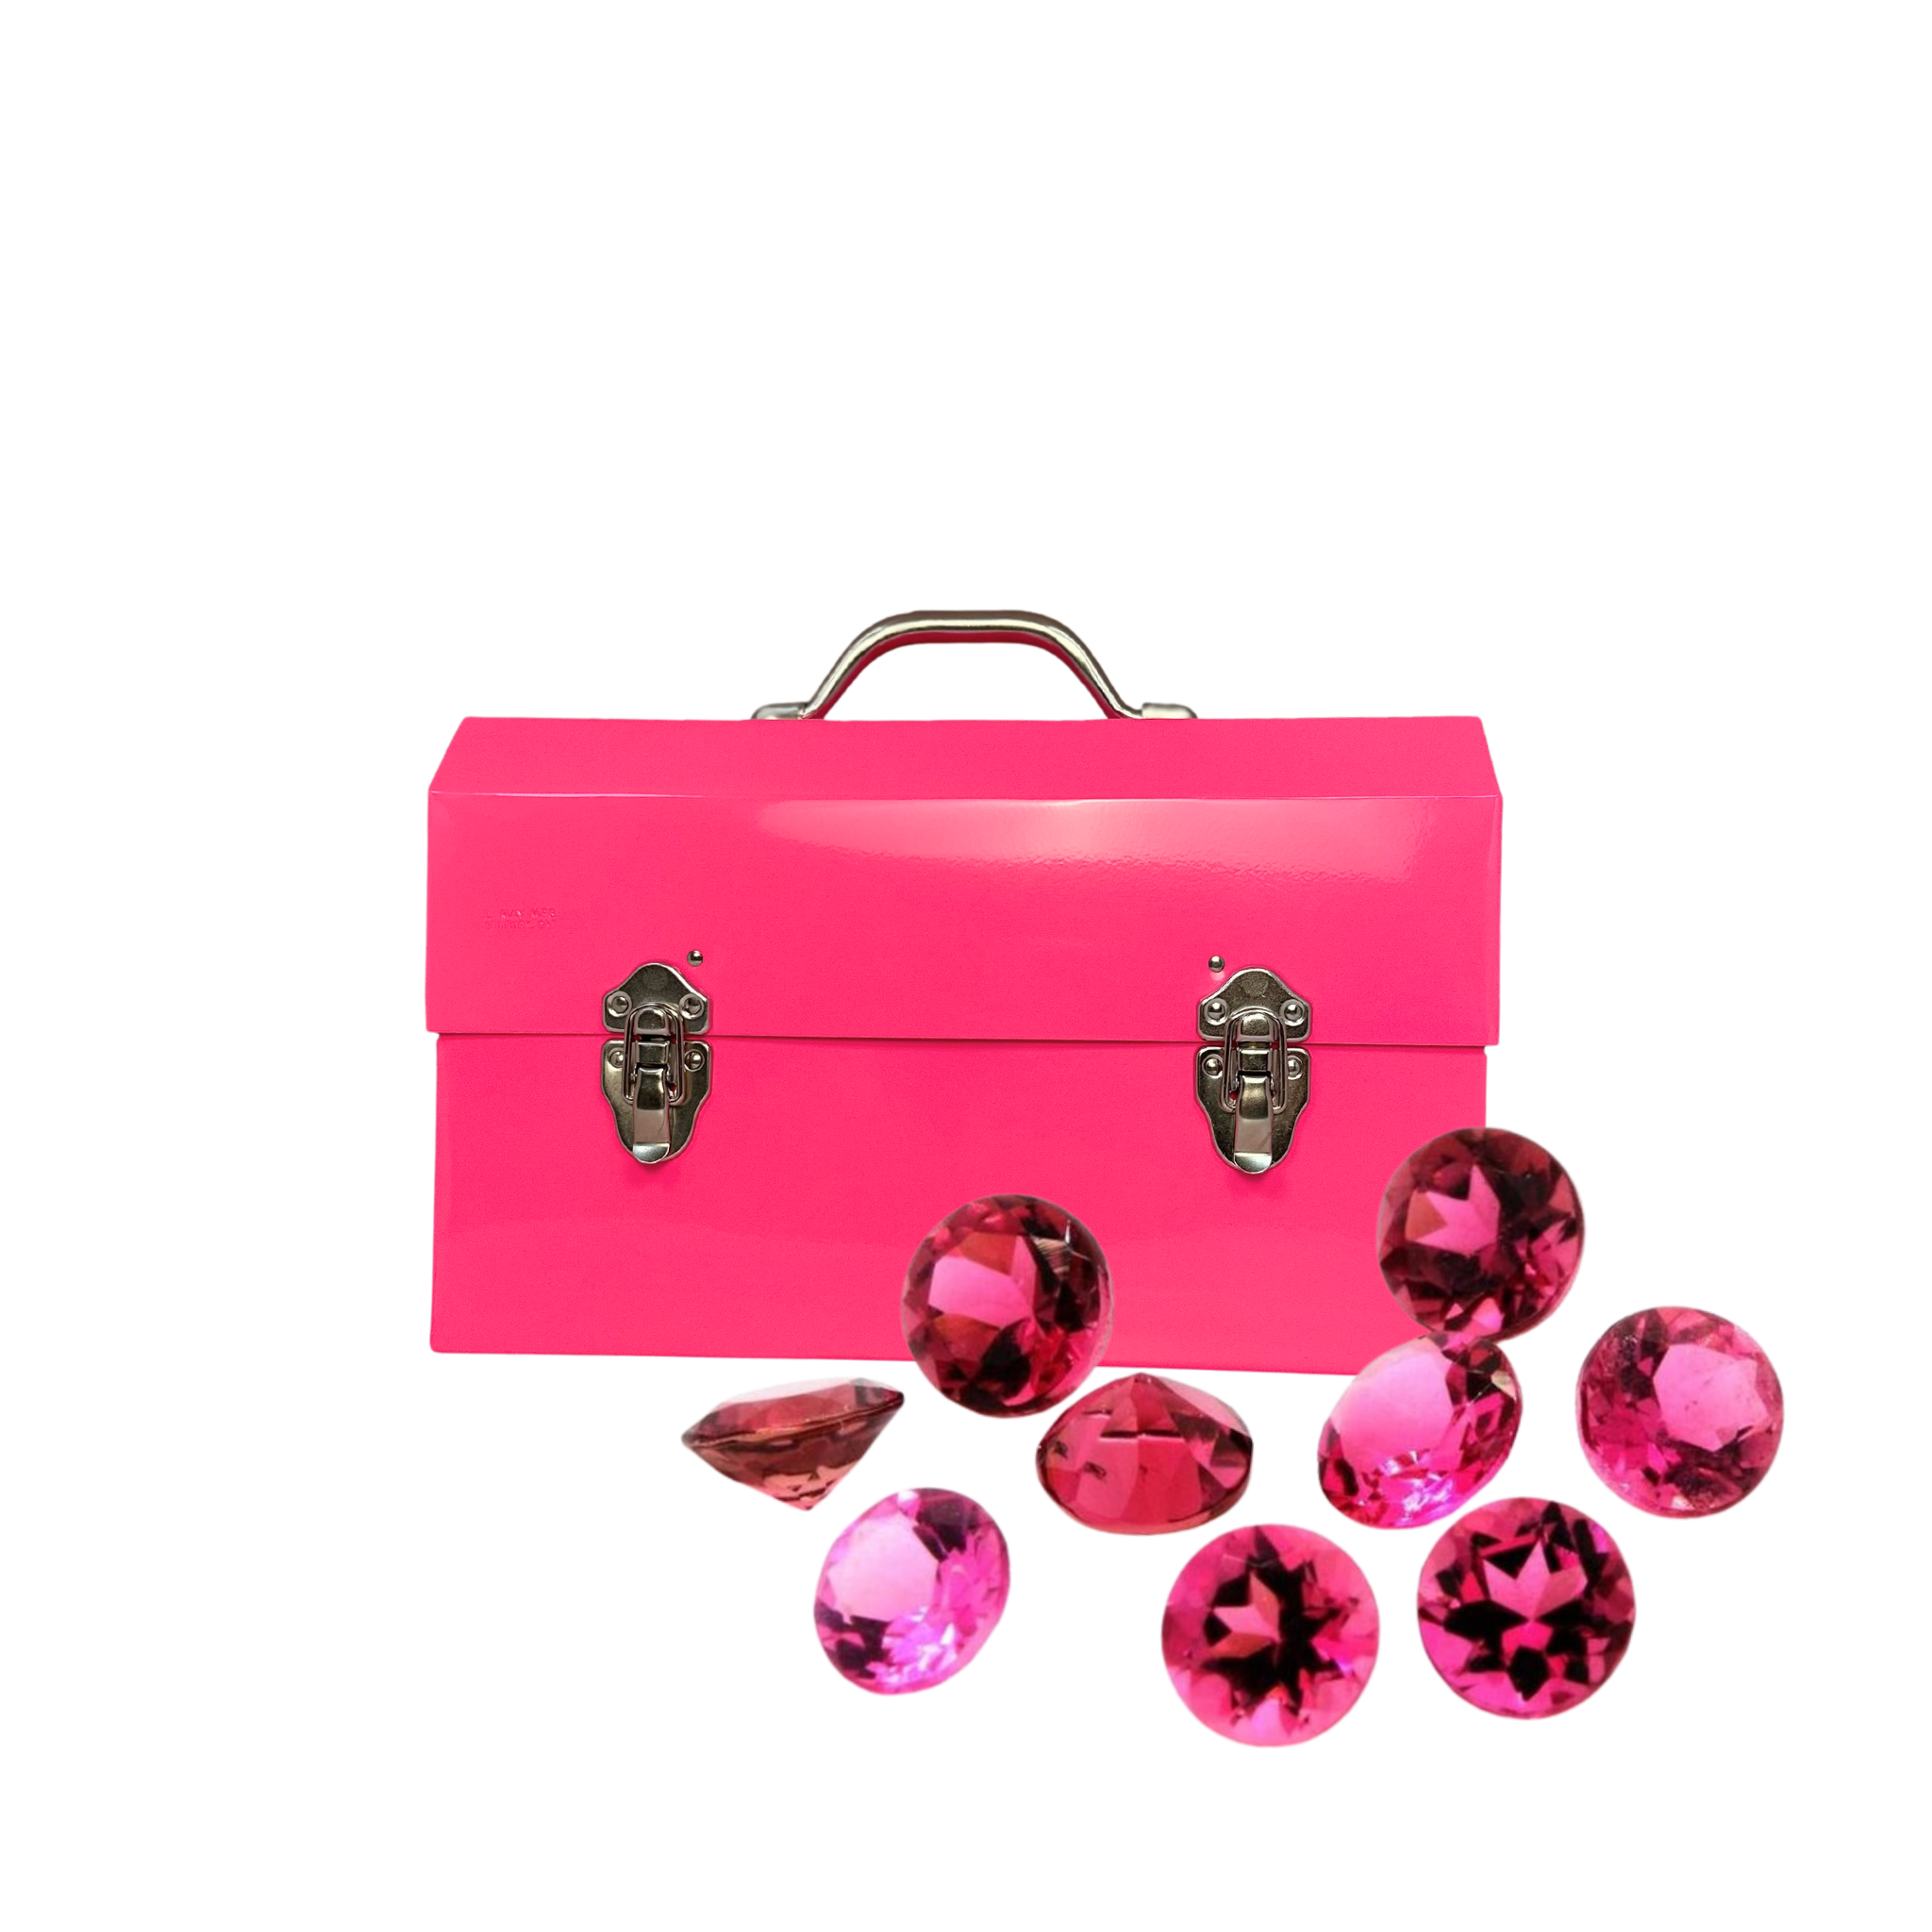 L. May aluminum lunchbox powder coated in pink for the gemstone pink tourmaline collection